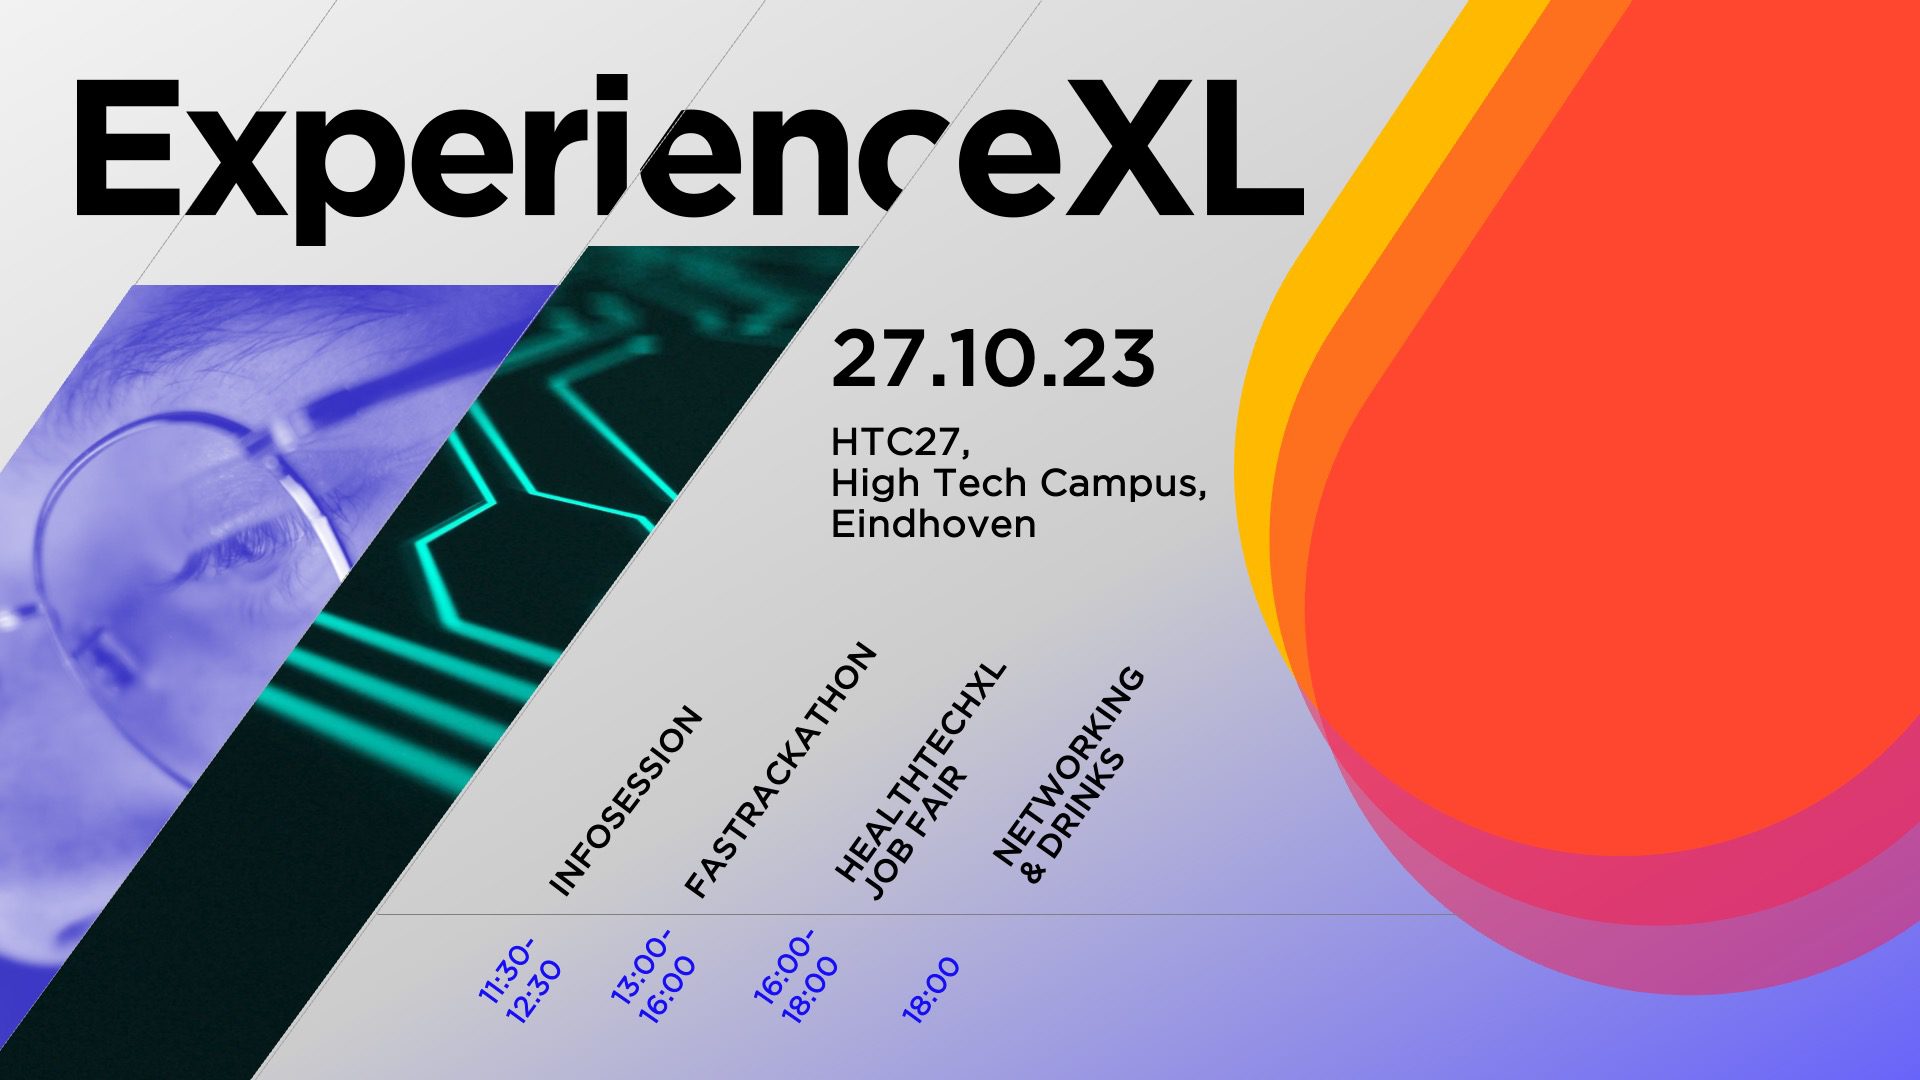 Experience all HighTechXL has to offer at ExperienceXL